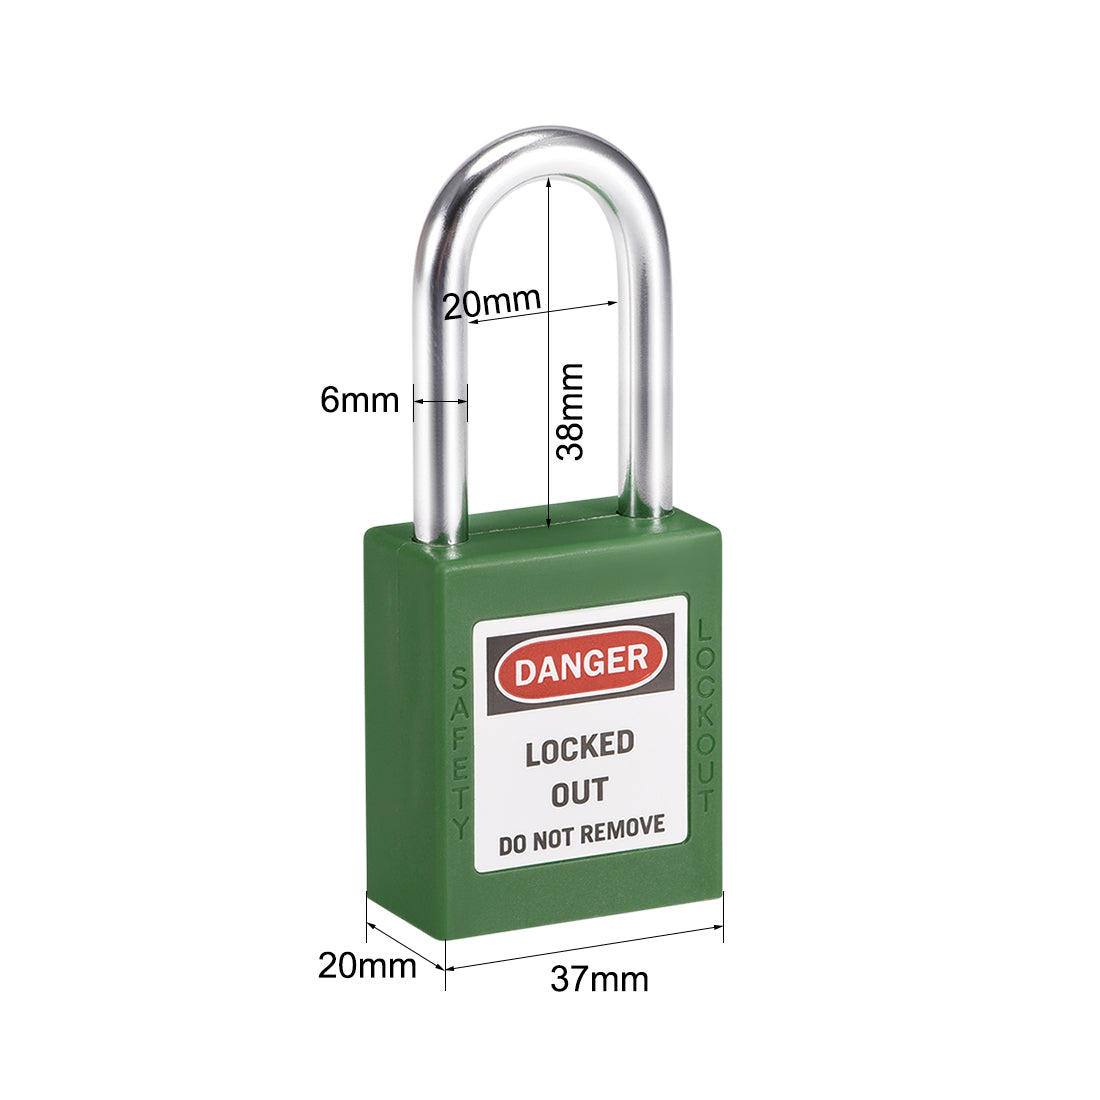 uxcell Uxcell Lockout Tagout Safety Padlock 38mm Steel Shackle Keyed Alike Green 2Pcs